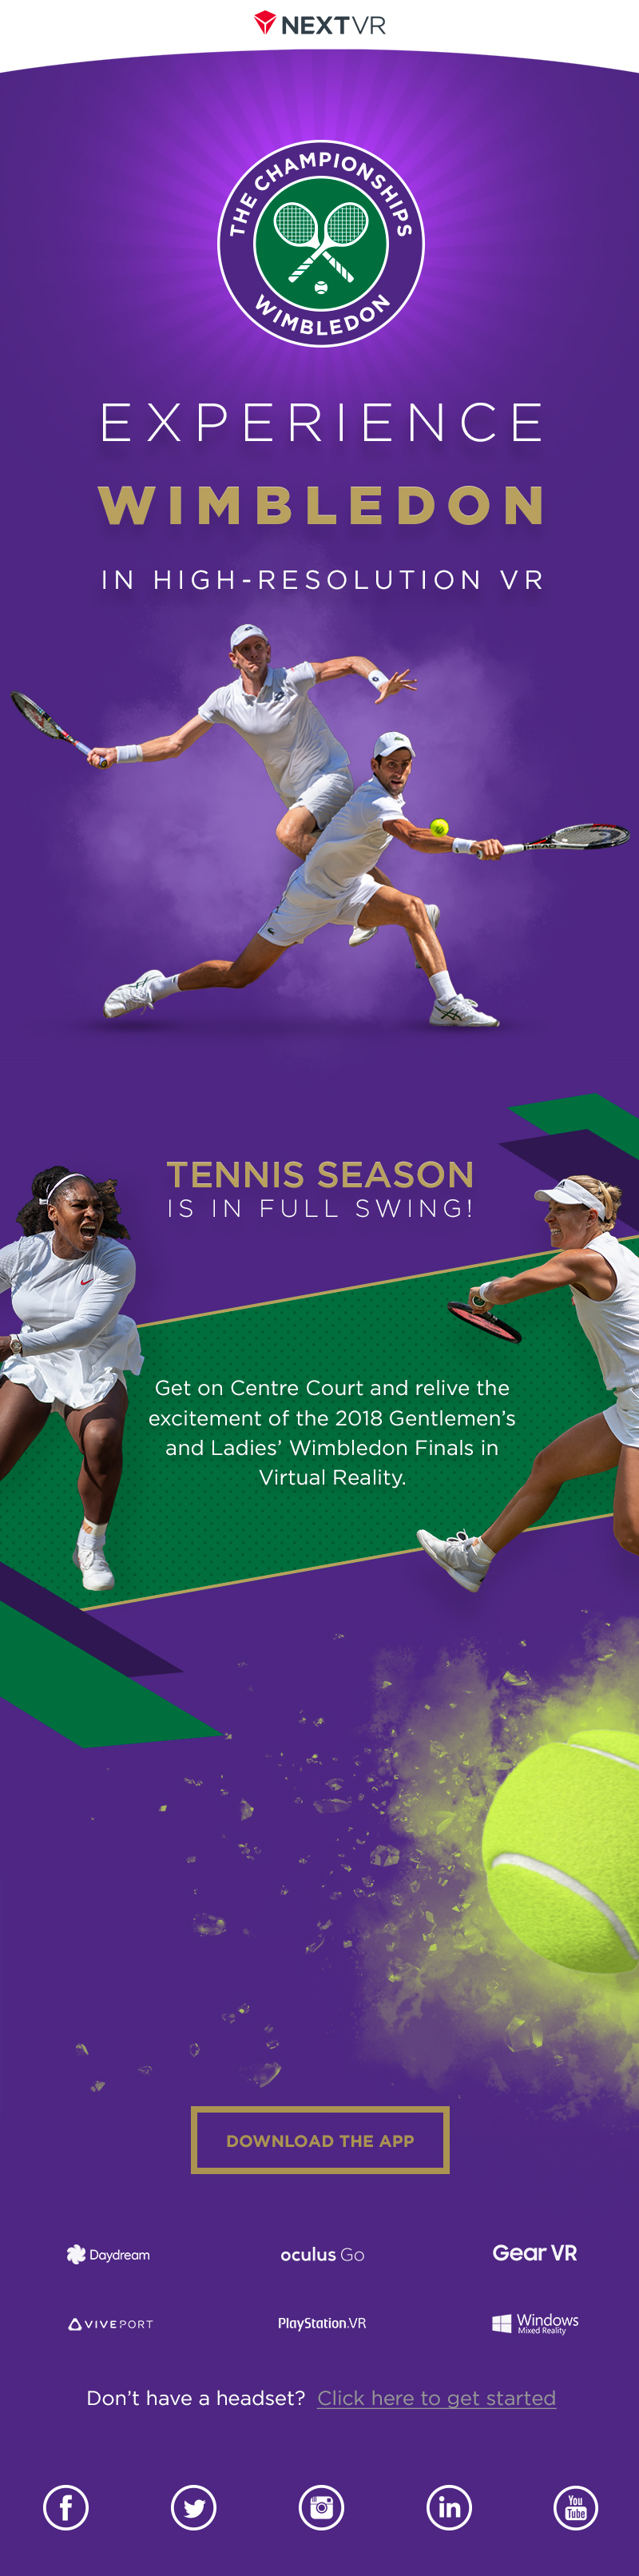 Email Marketing Design for Wimbledon Tennis in Virtual Reality